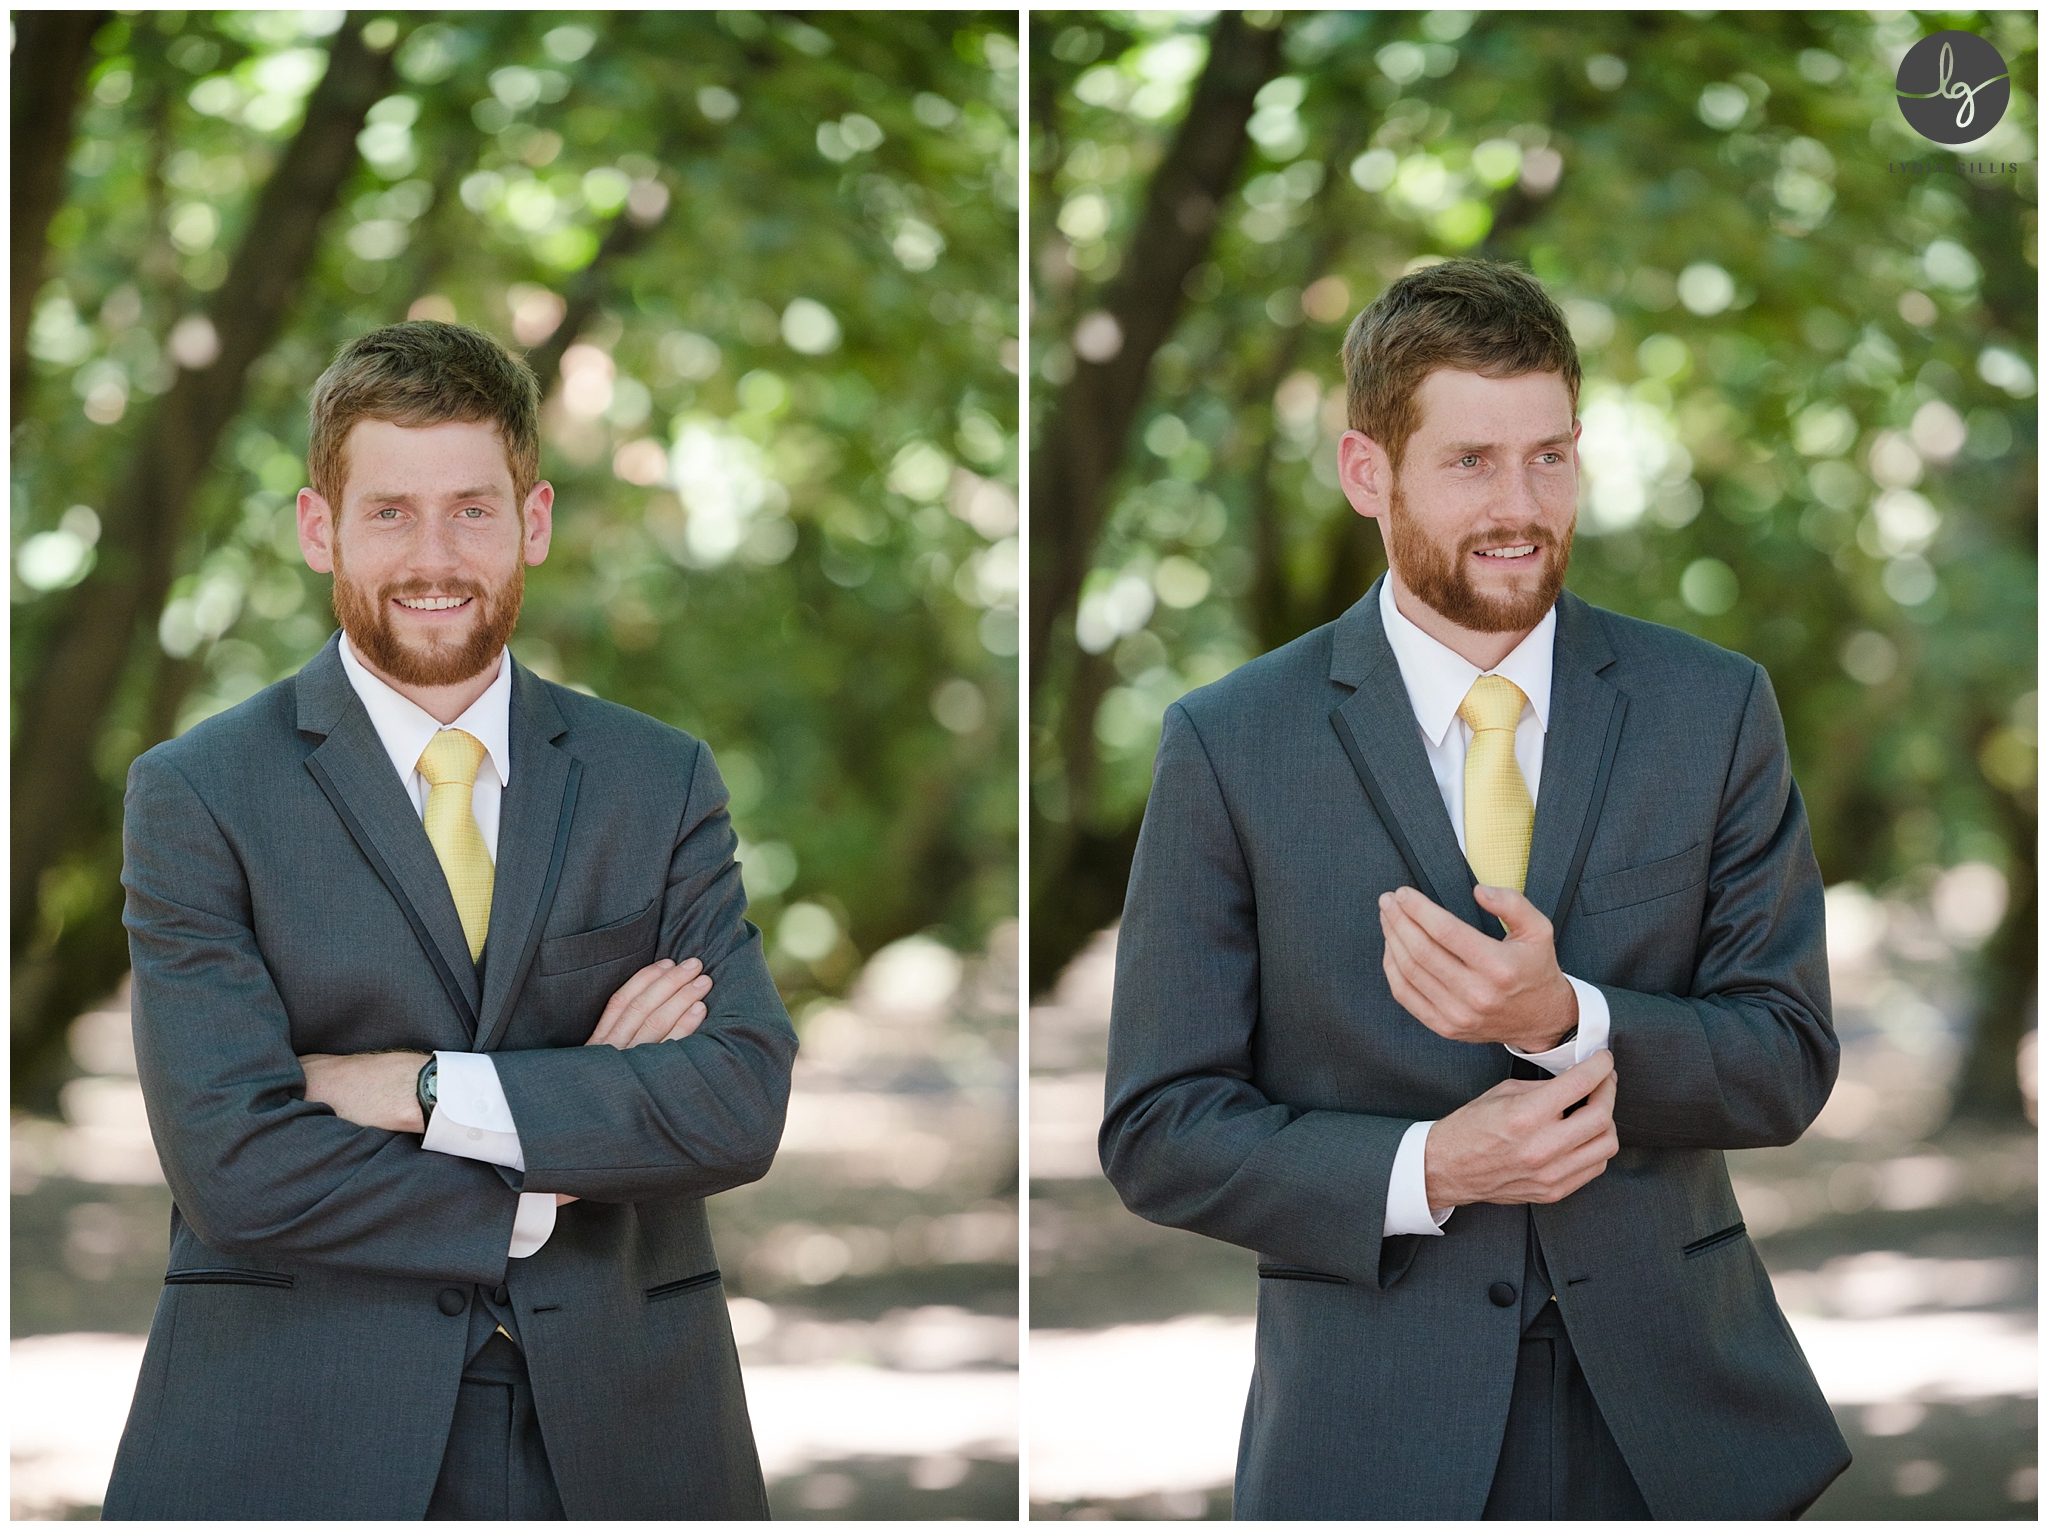 Outdoor wedding picture of groom | Lydia Gillis Photography 